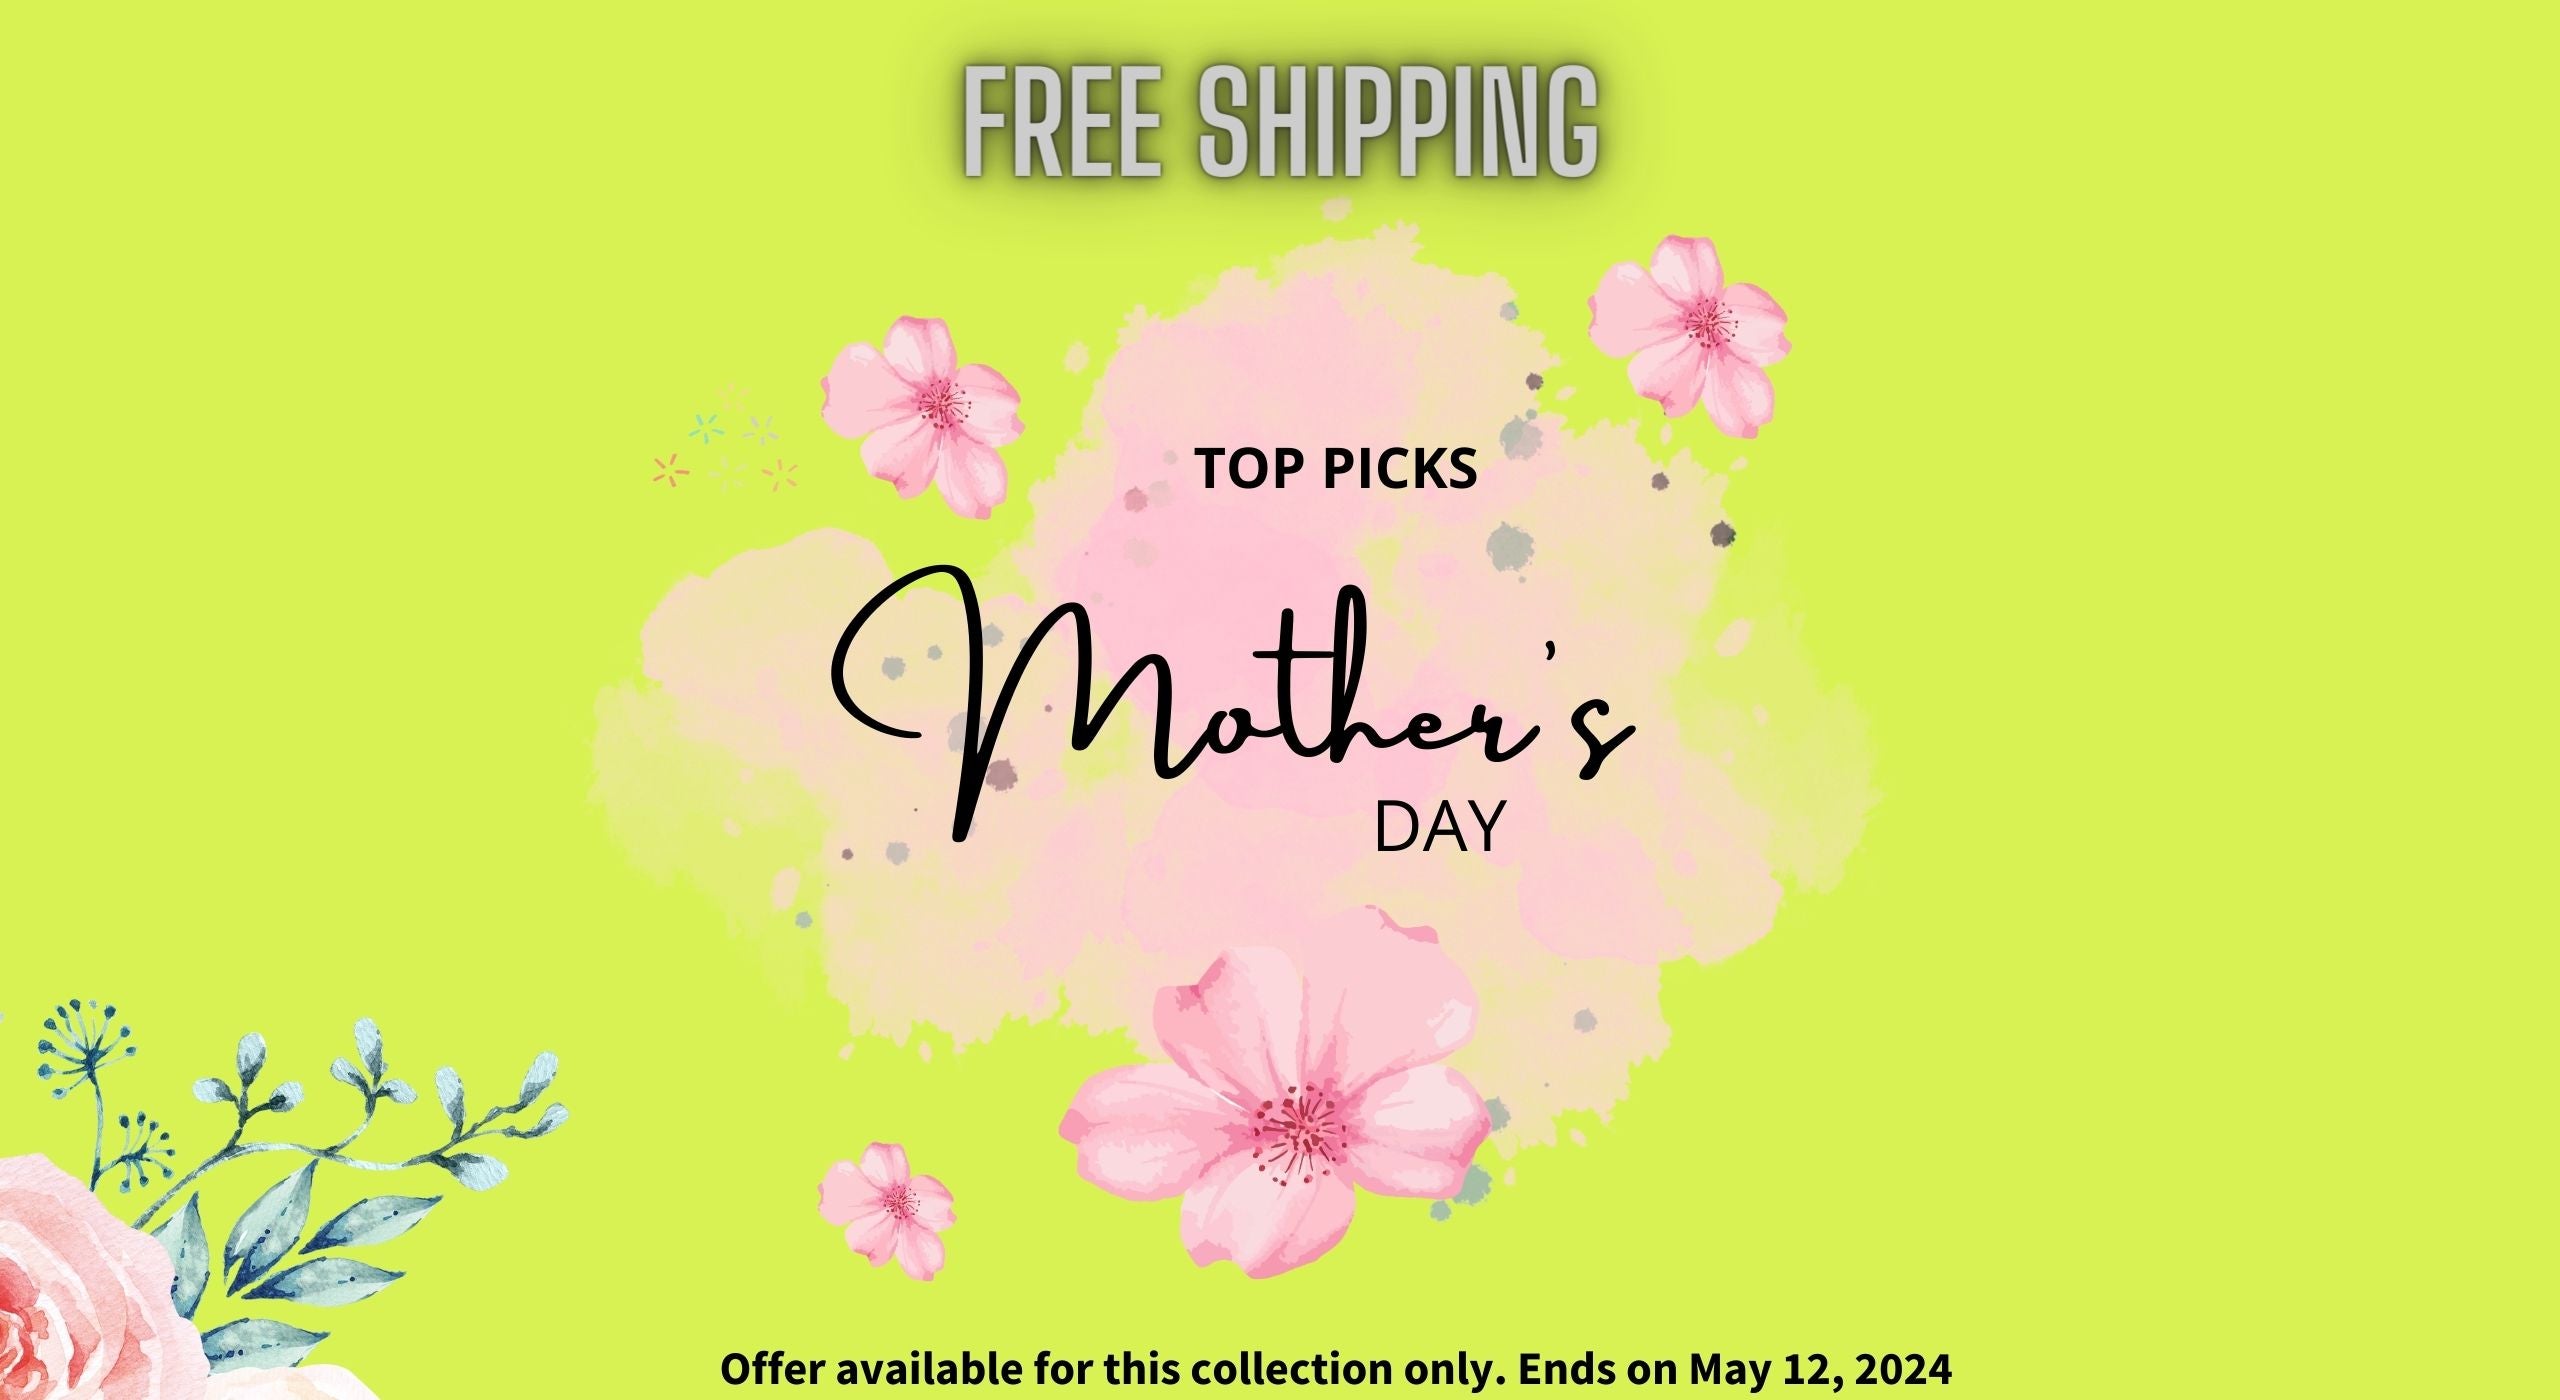 Free Shipping special offer mother's day gift choices boutique eco-responsable VG